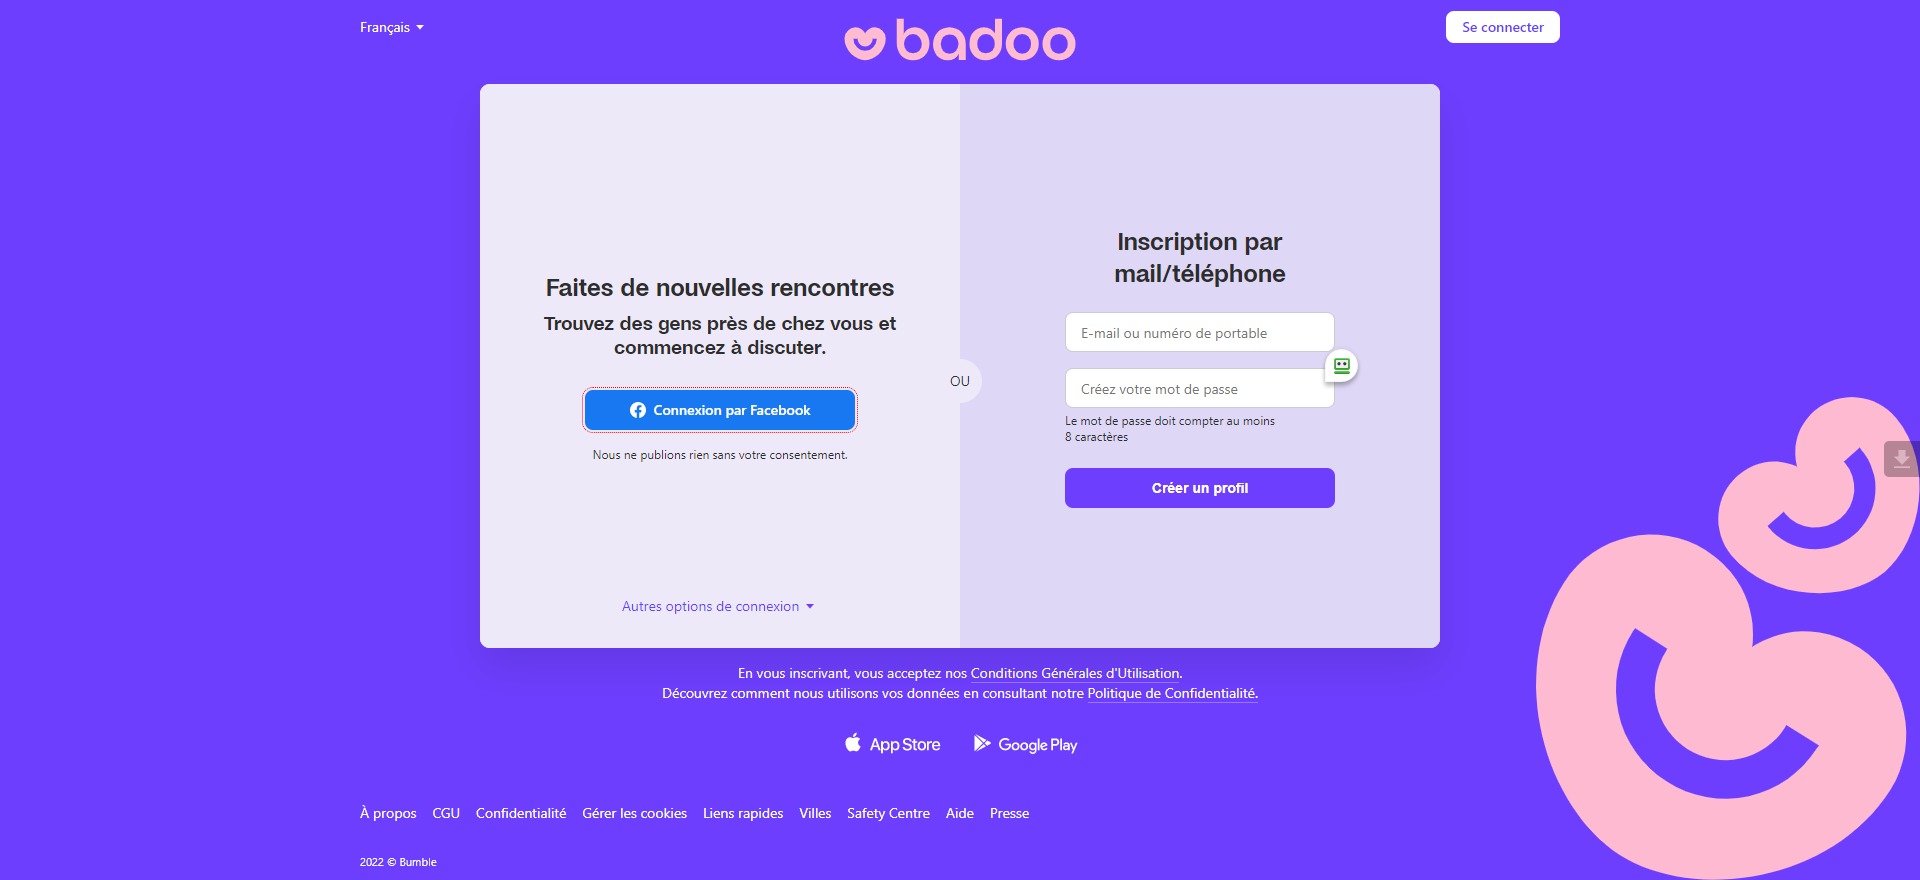 Badoo: Everything You Need to Know